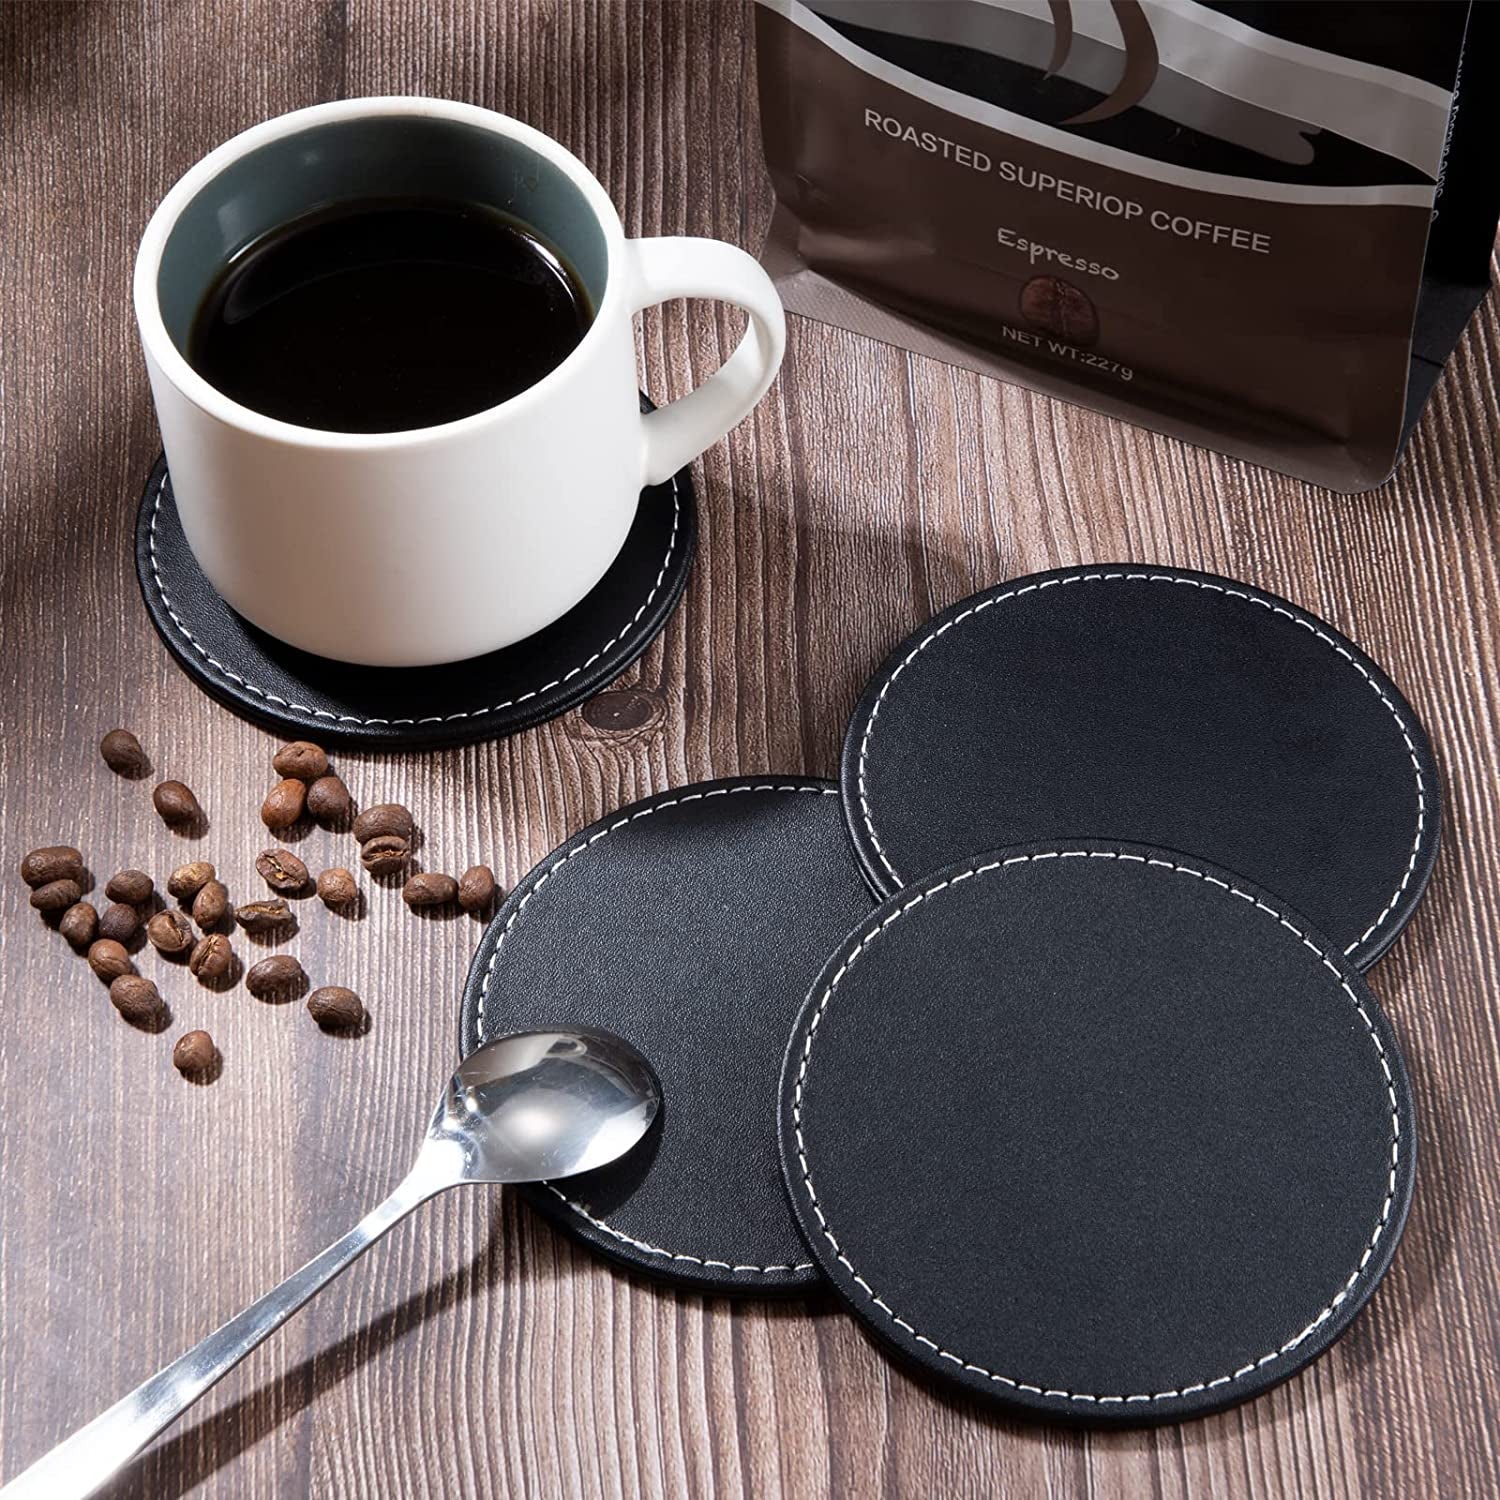 Drink Coasters PU Leather Coaster Black Cup Pad round Coffee Drink Mat for Home and Bar Set of 6 with Holder - FoxMart™️ - MengH-SHOP